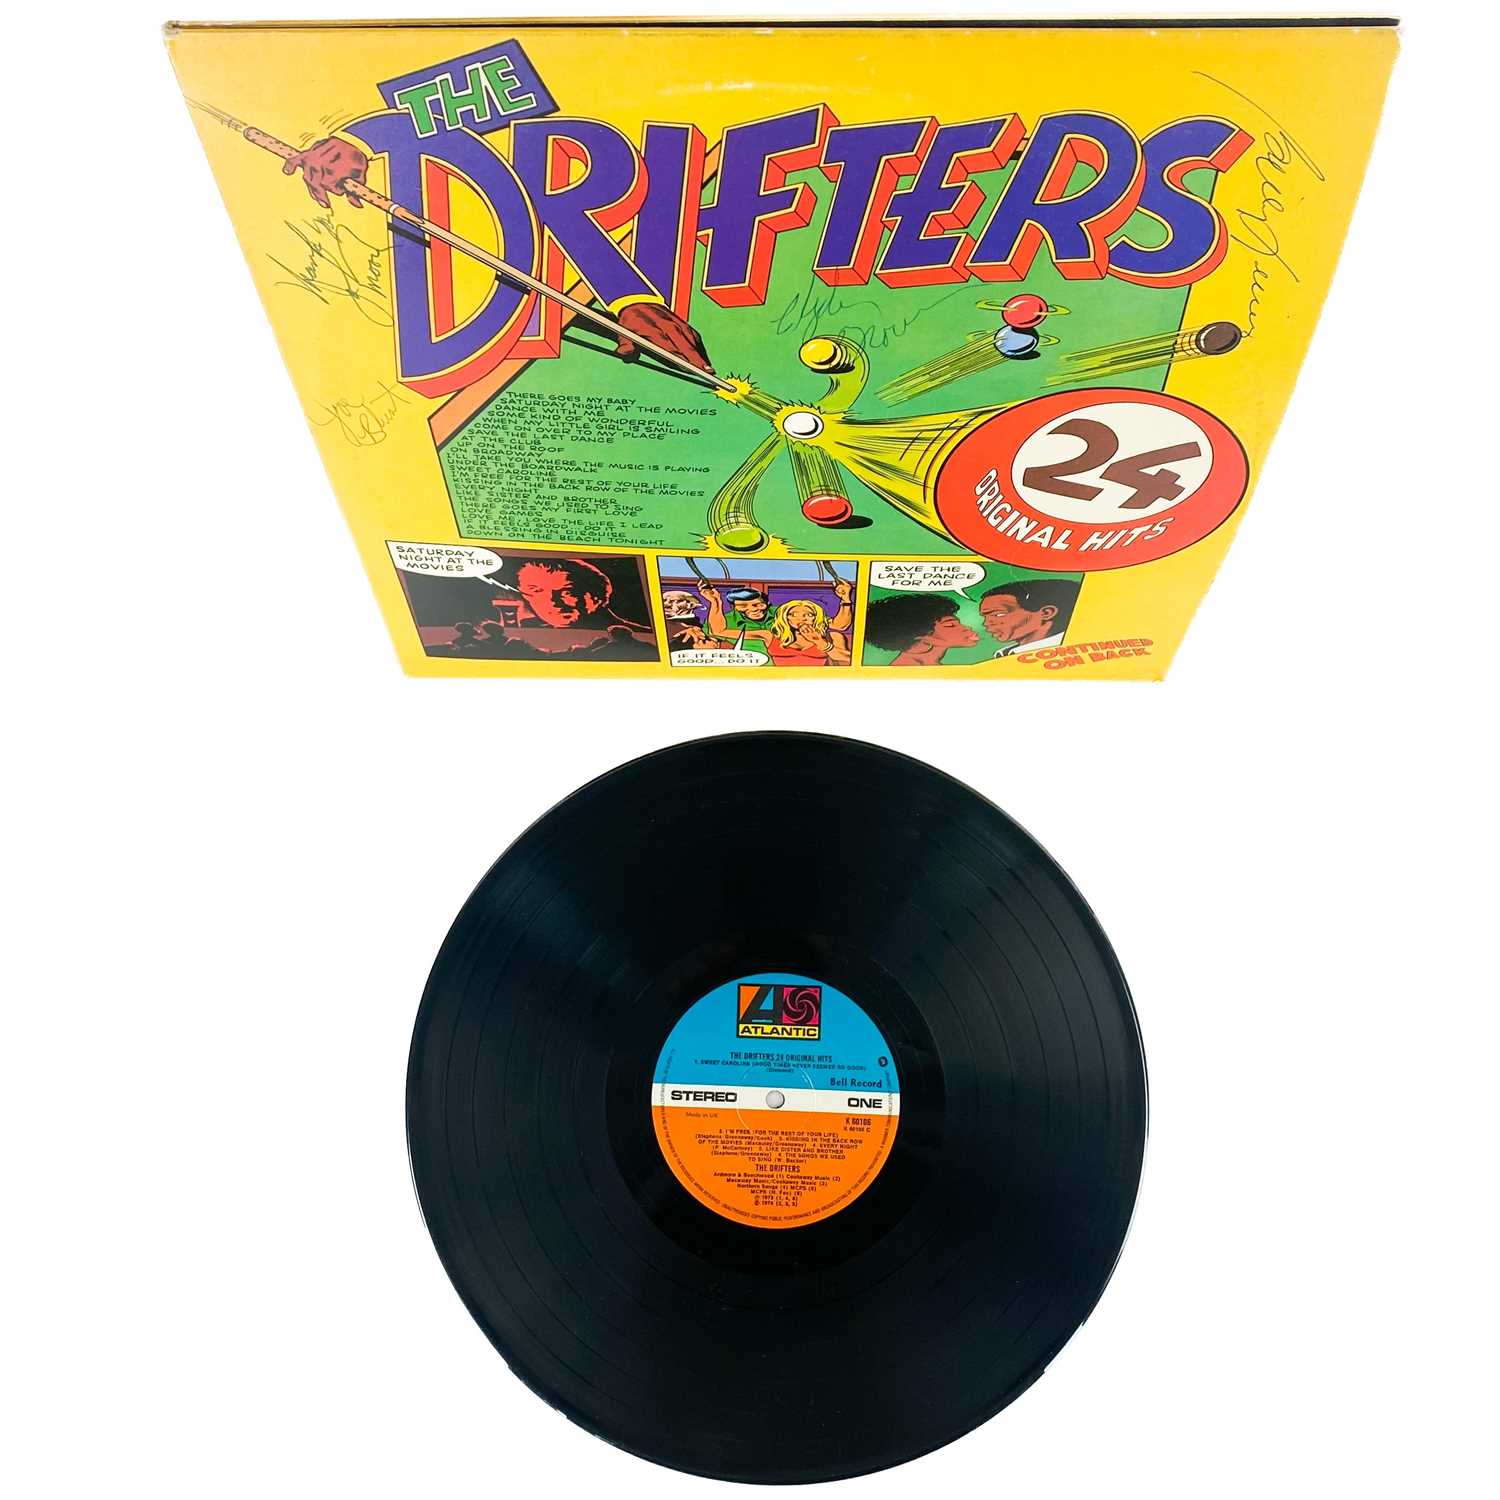 Signed; The Drifters - Image 3 of 11